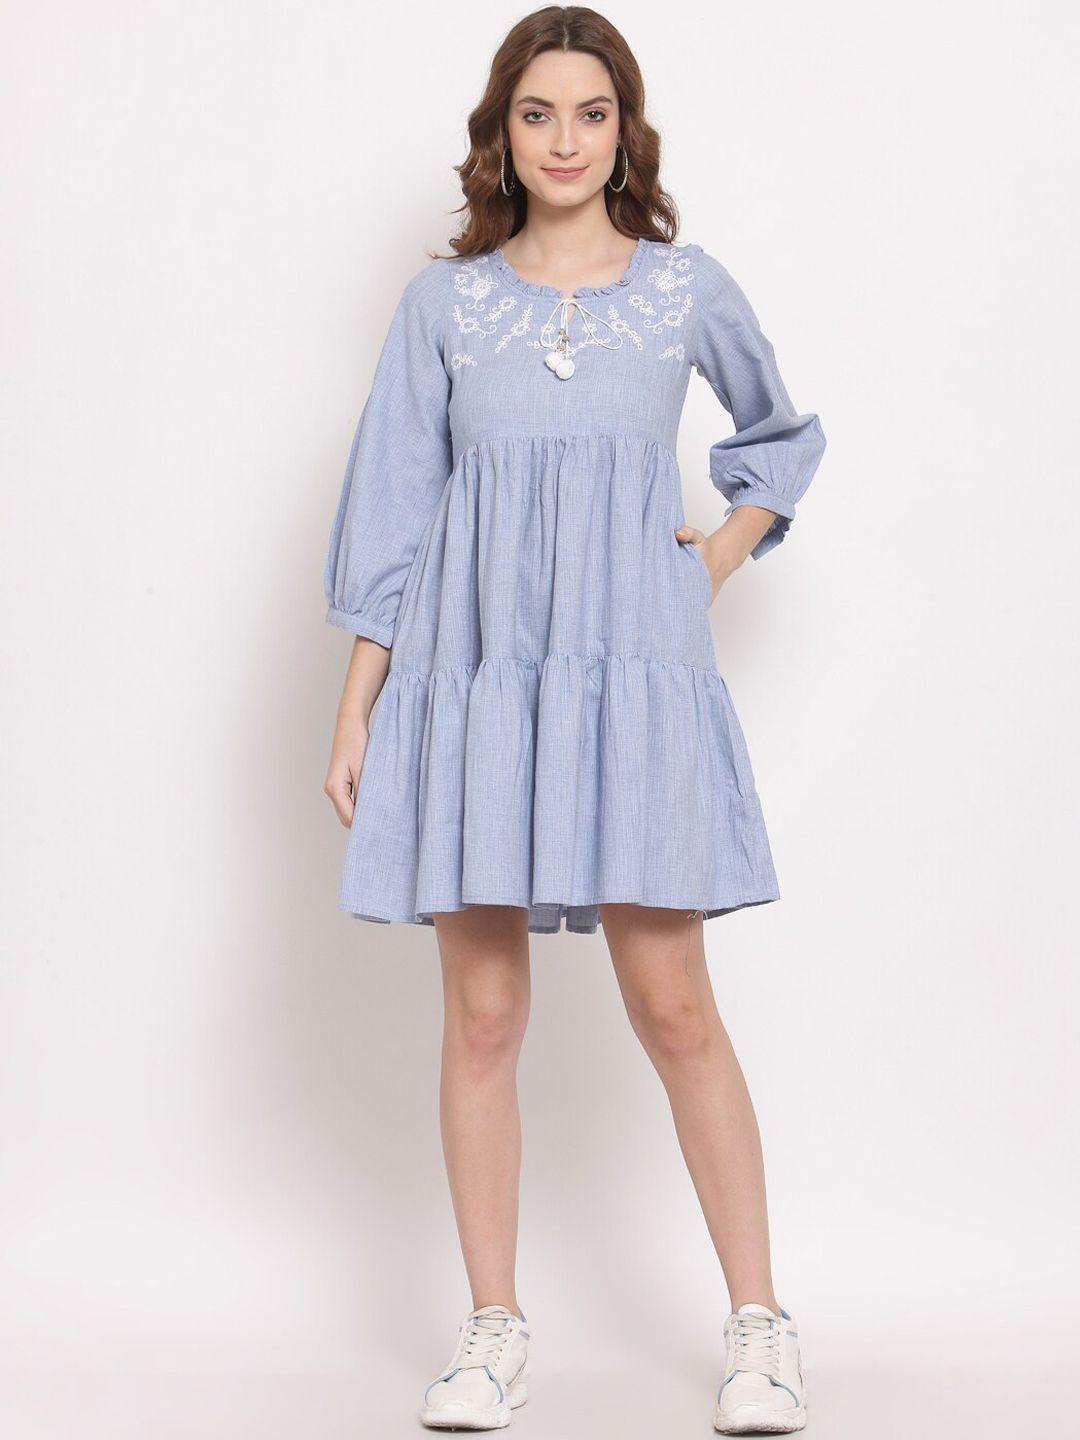 terquois-blue-embroidered-a-line-dress